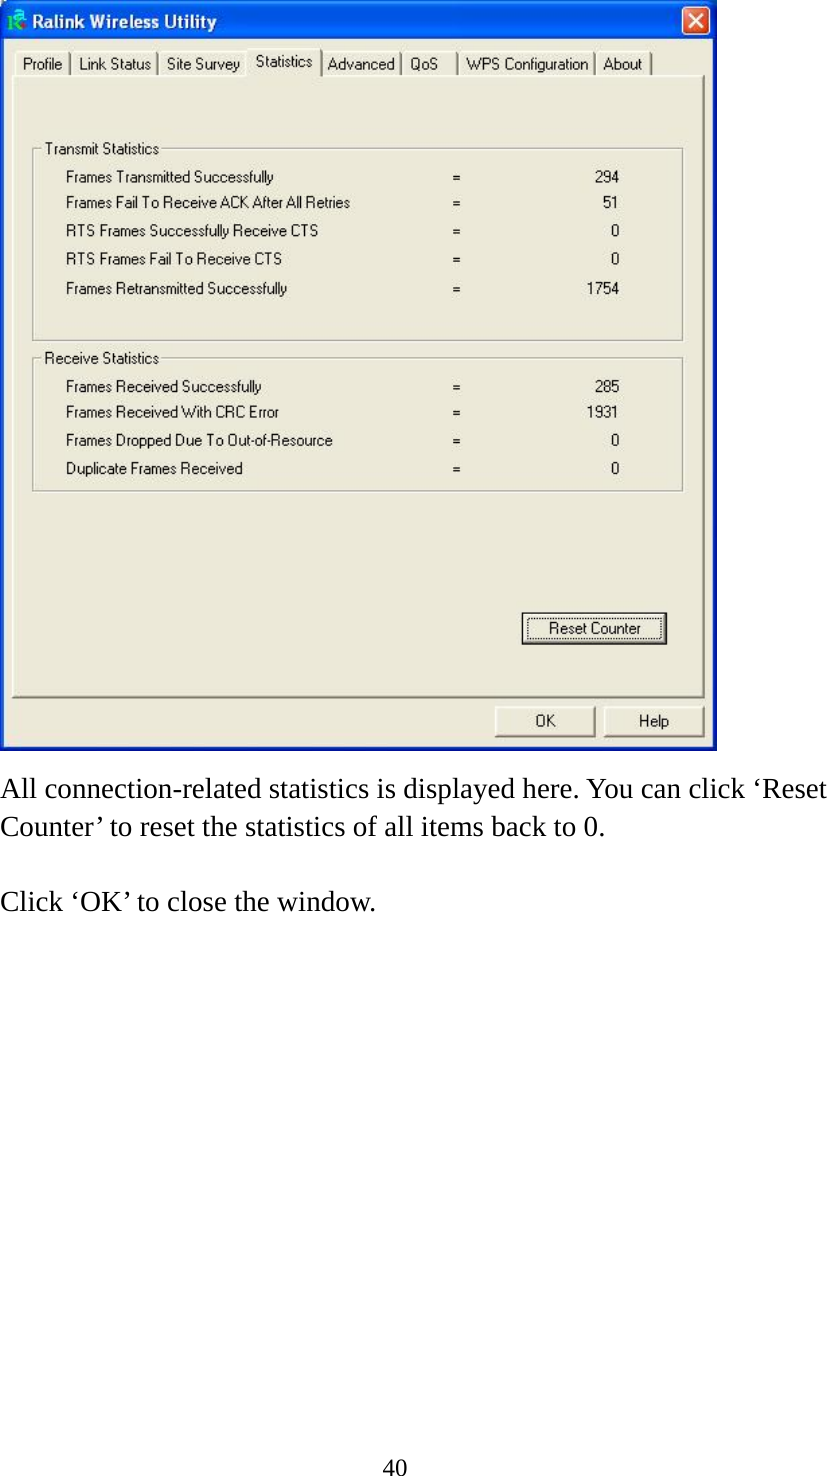  40 All connection-related statistics is displayed here. You can click ‘Reset Counter’ to reset the statistics of all items back to 0.  Click ‘OK’ to close the window. 